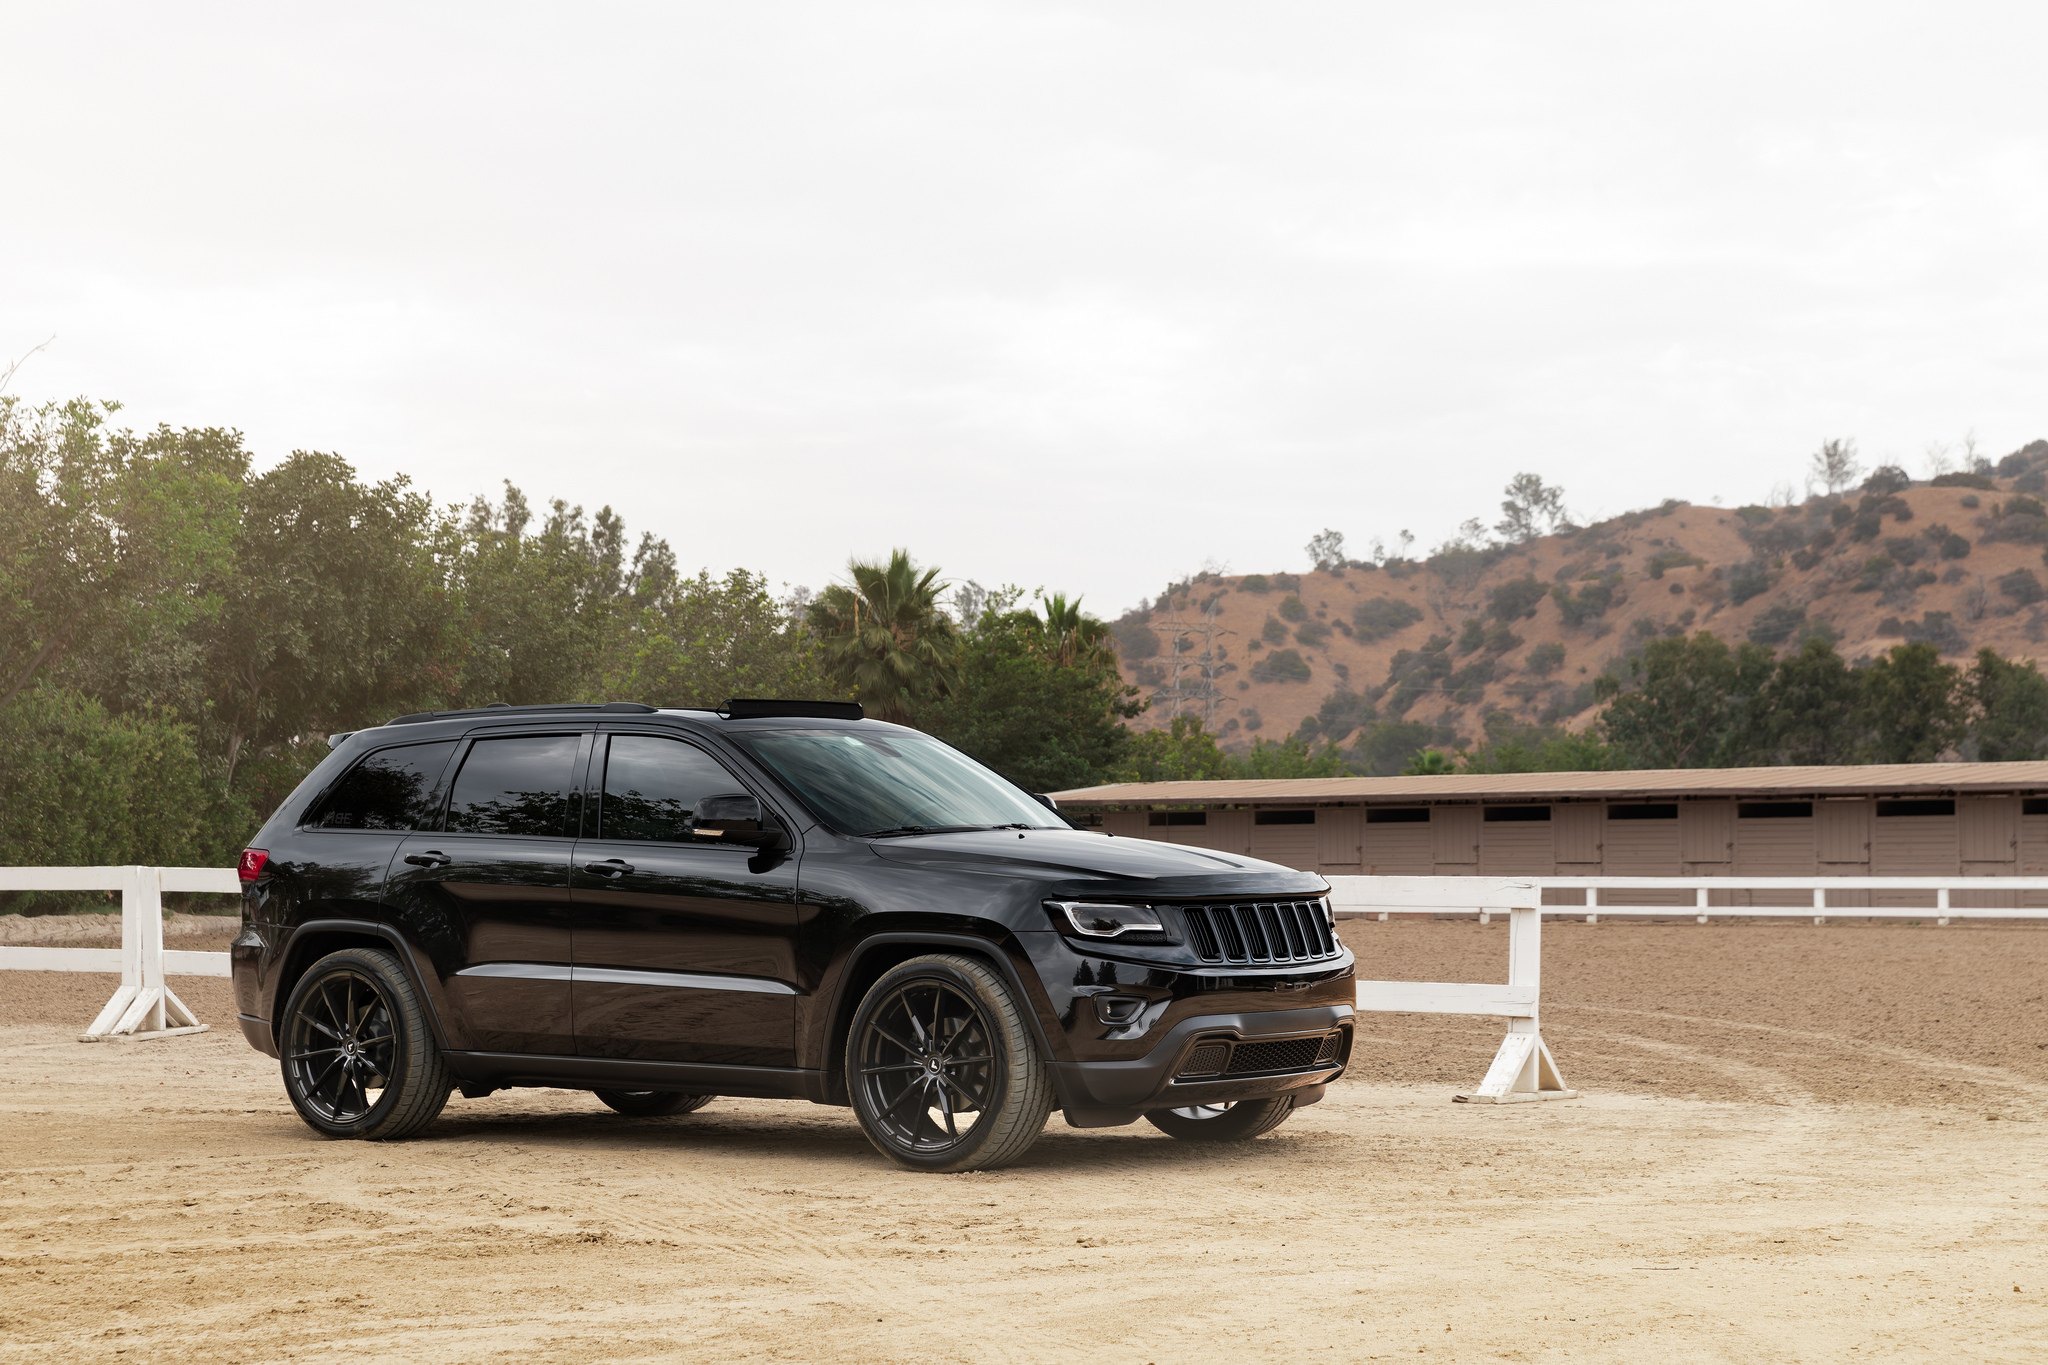 BlackOut Styling Reveals the VIP Spirit of Jeep Grand Cherokee — CARiD